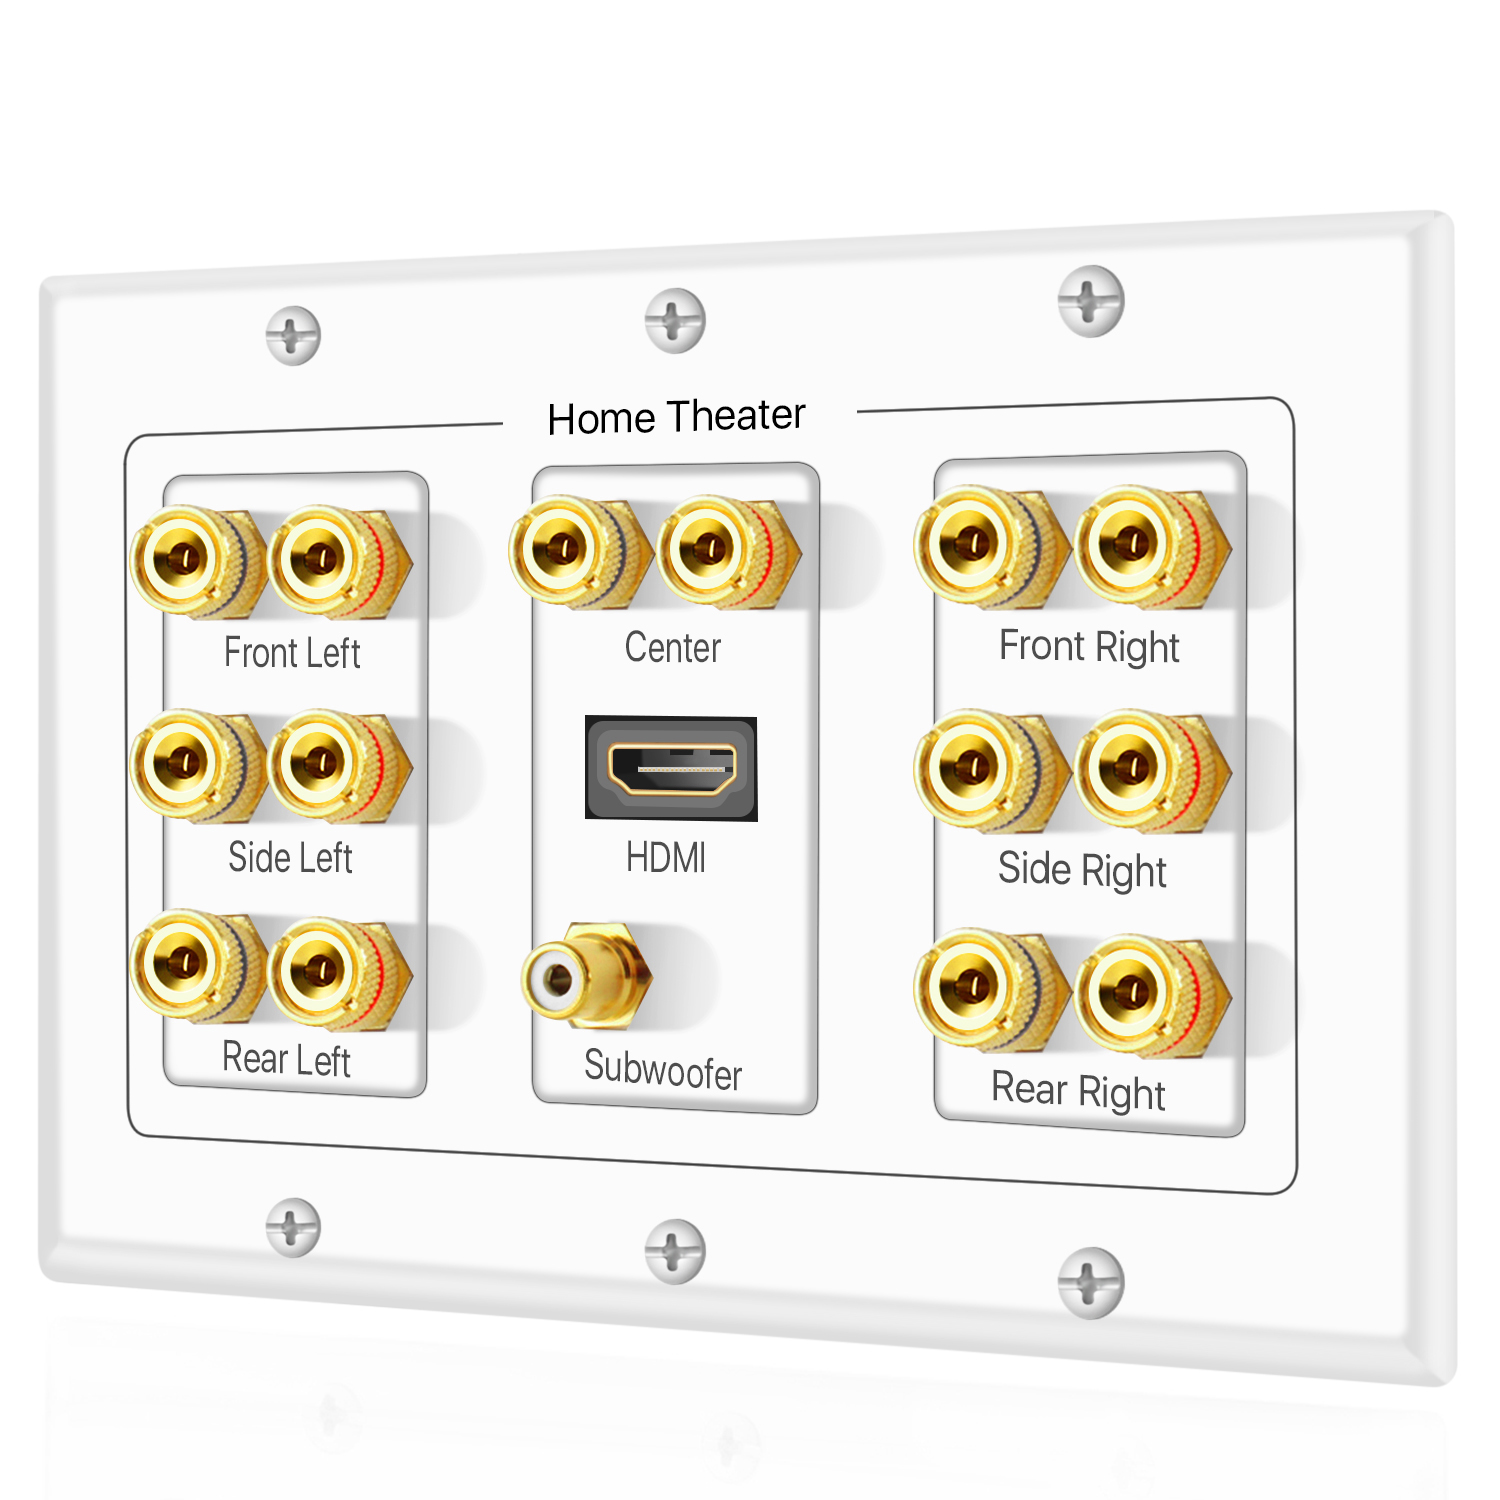 Home Theater Speaker Wall Plate Outlet - 7.1 Surround Sound Audio Distribution Panel, Gold Plated Copper Banana Plug Binding Post Coupler, RCA LFE Jack for Subwoofer, HDMI 4K ARC/eARC Full HD (3-Gang) - image 1 of 5